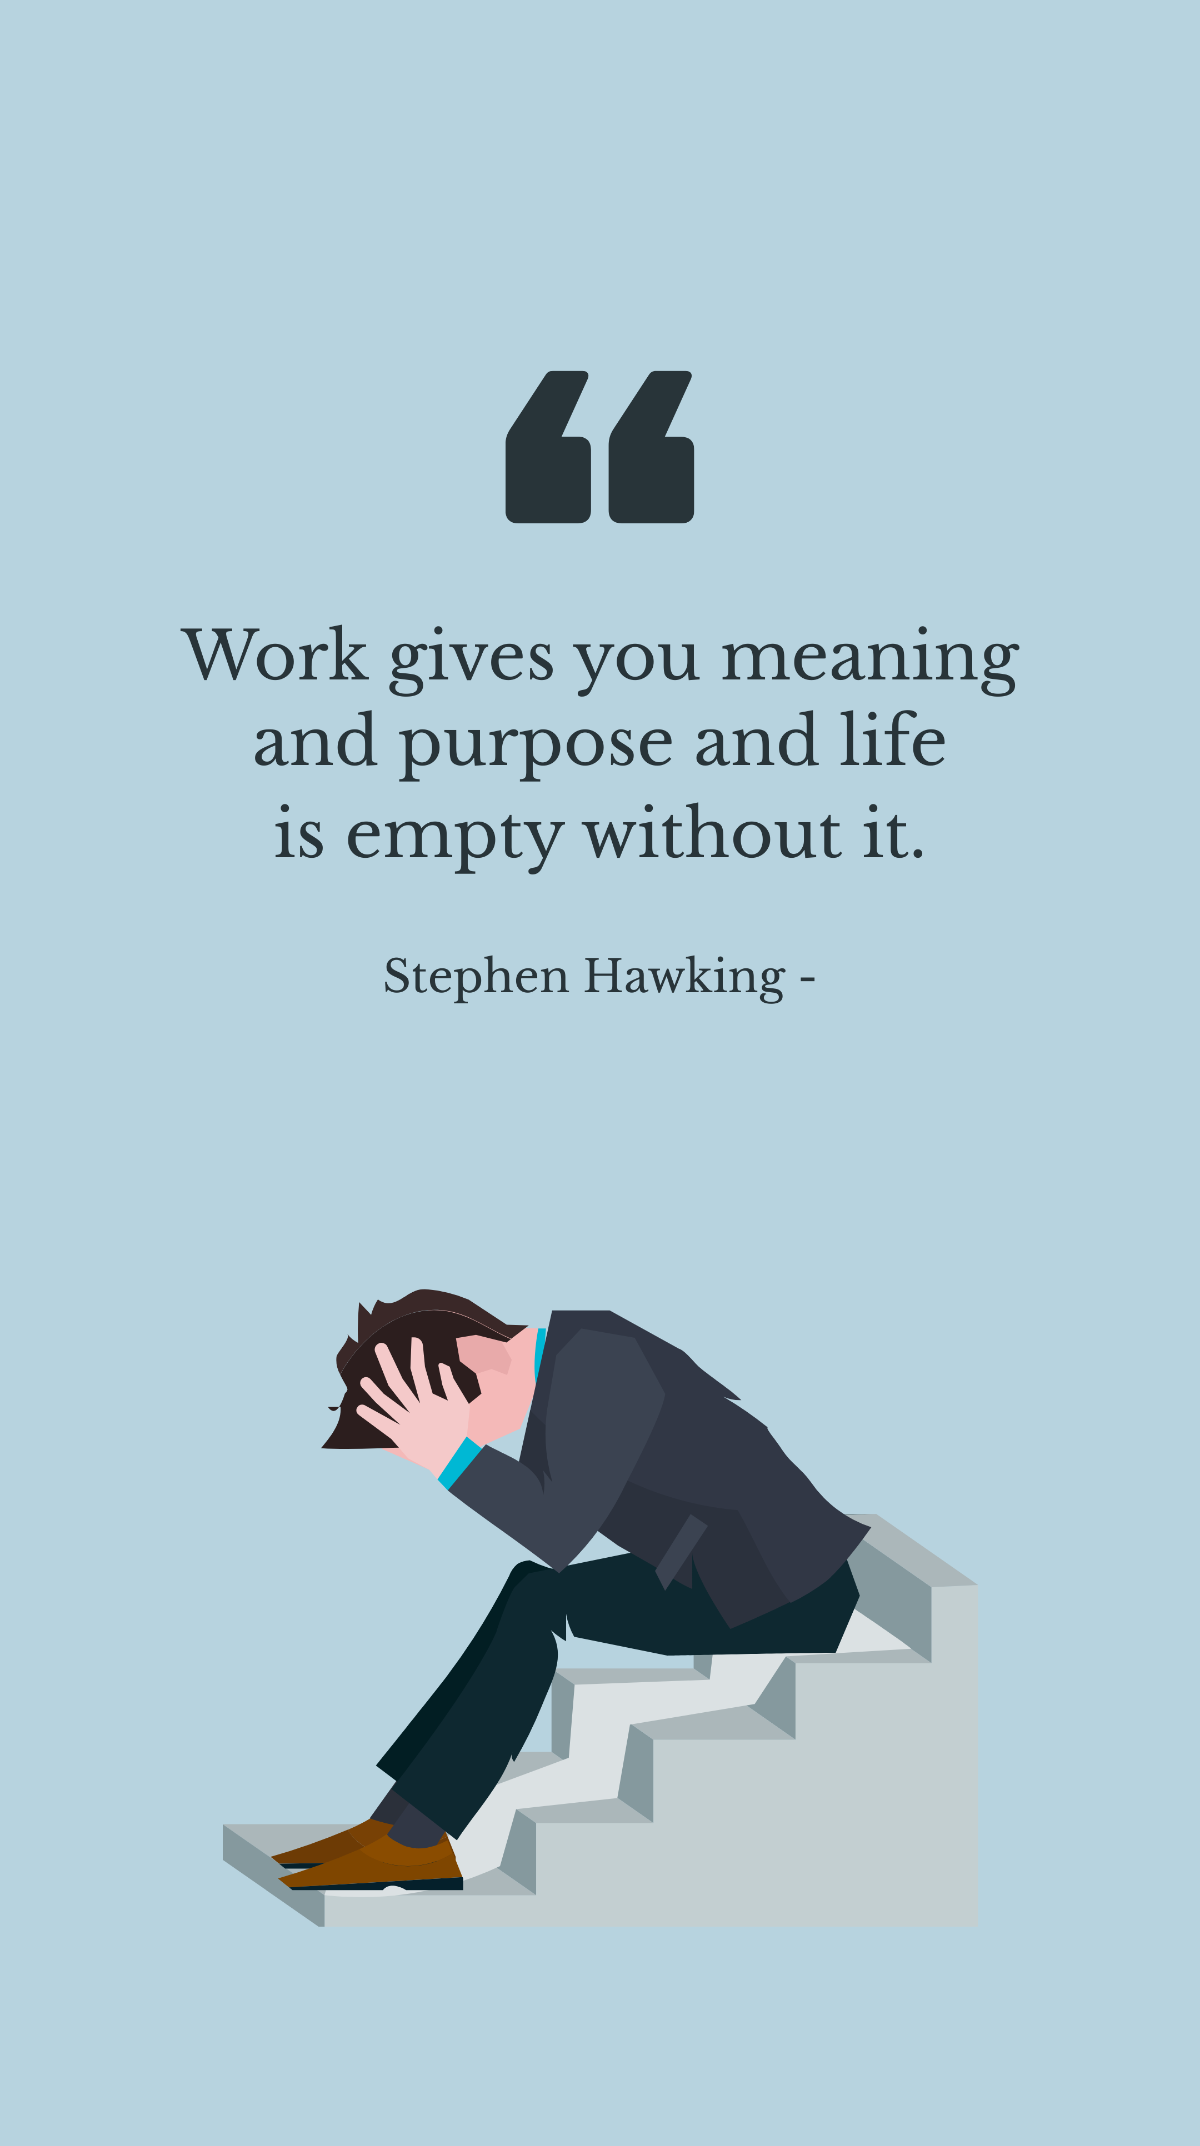 Stephen Hawking - Work gives you meaning and purpose and life is empty without it. Template